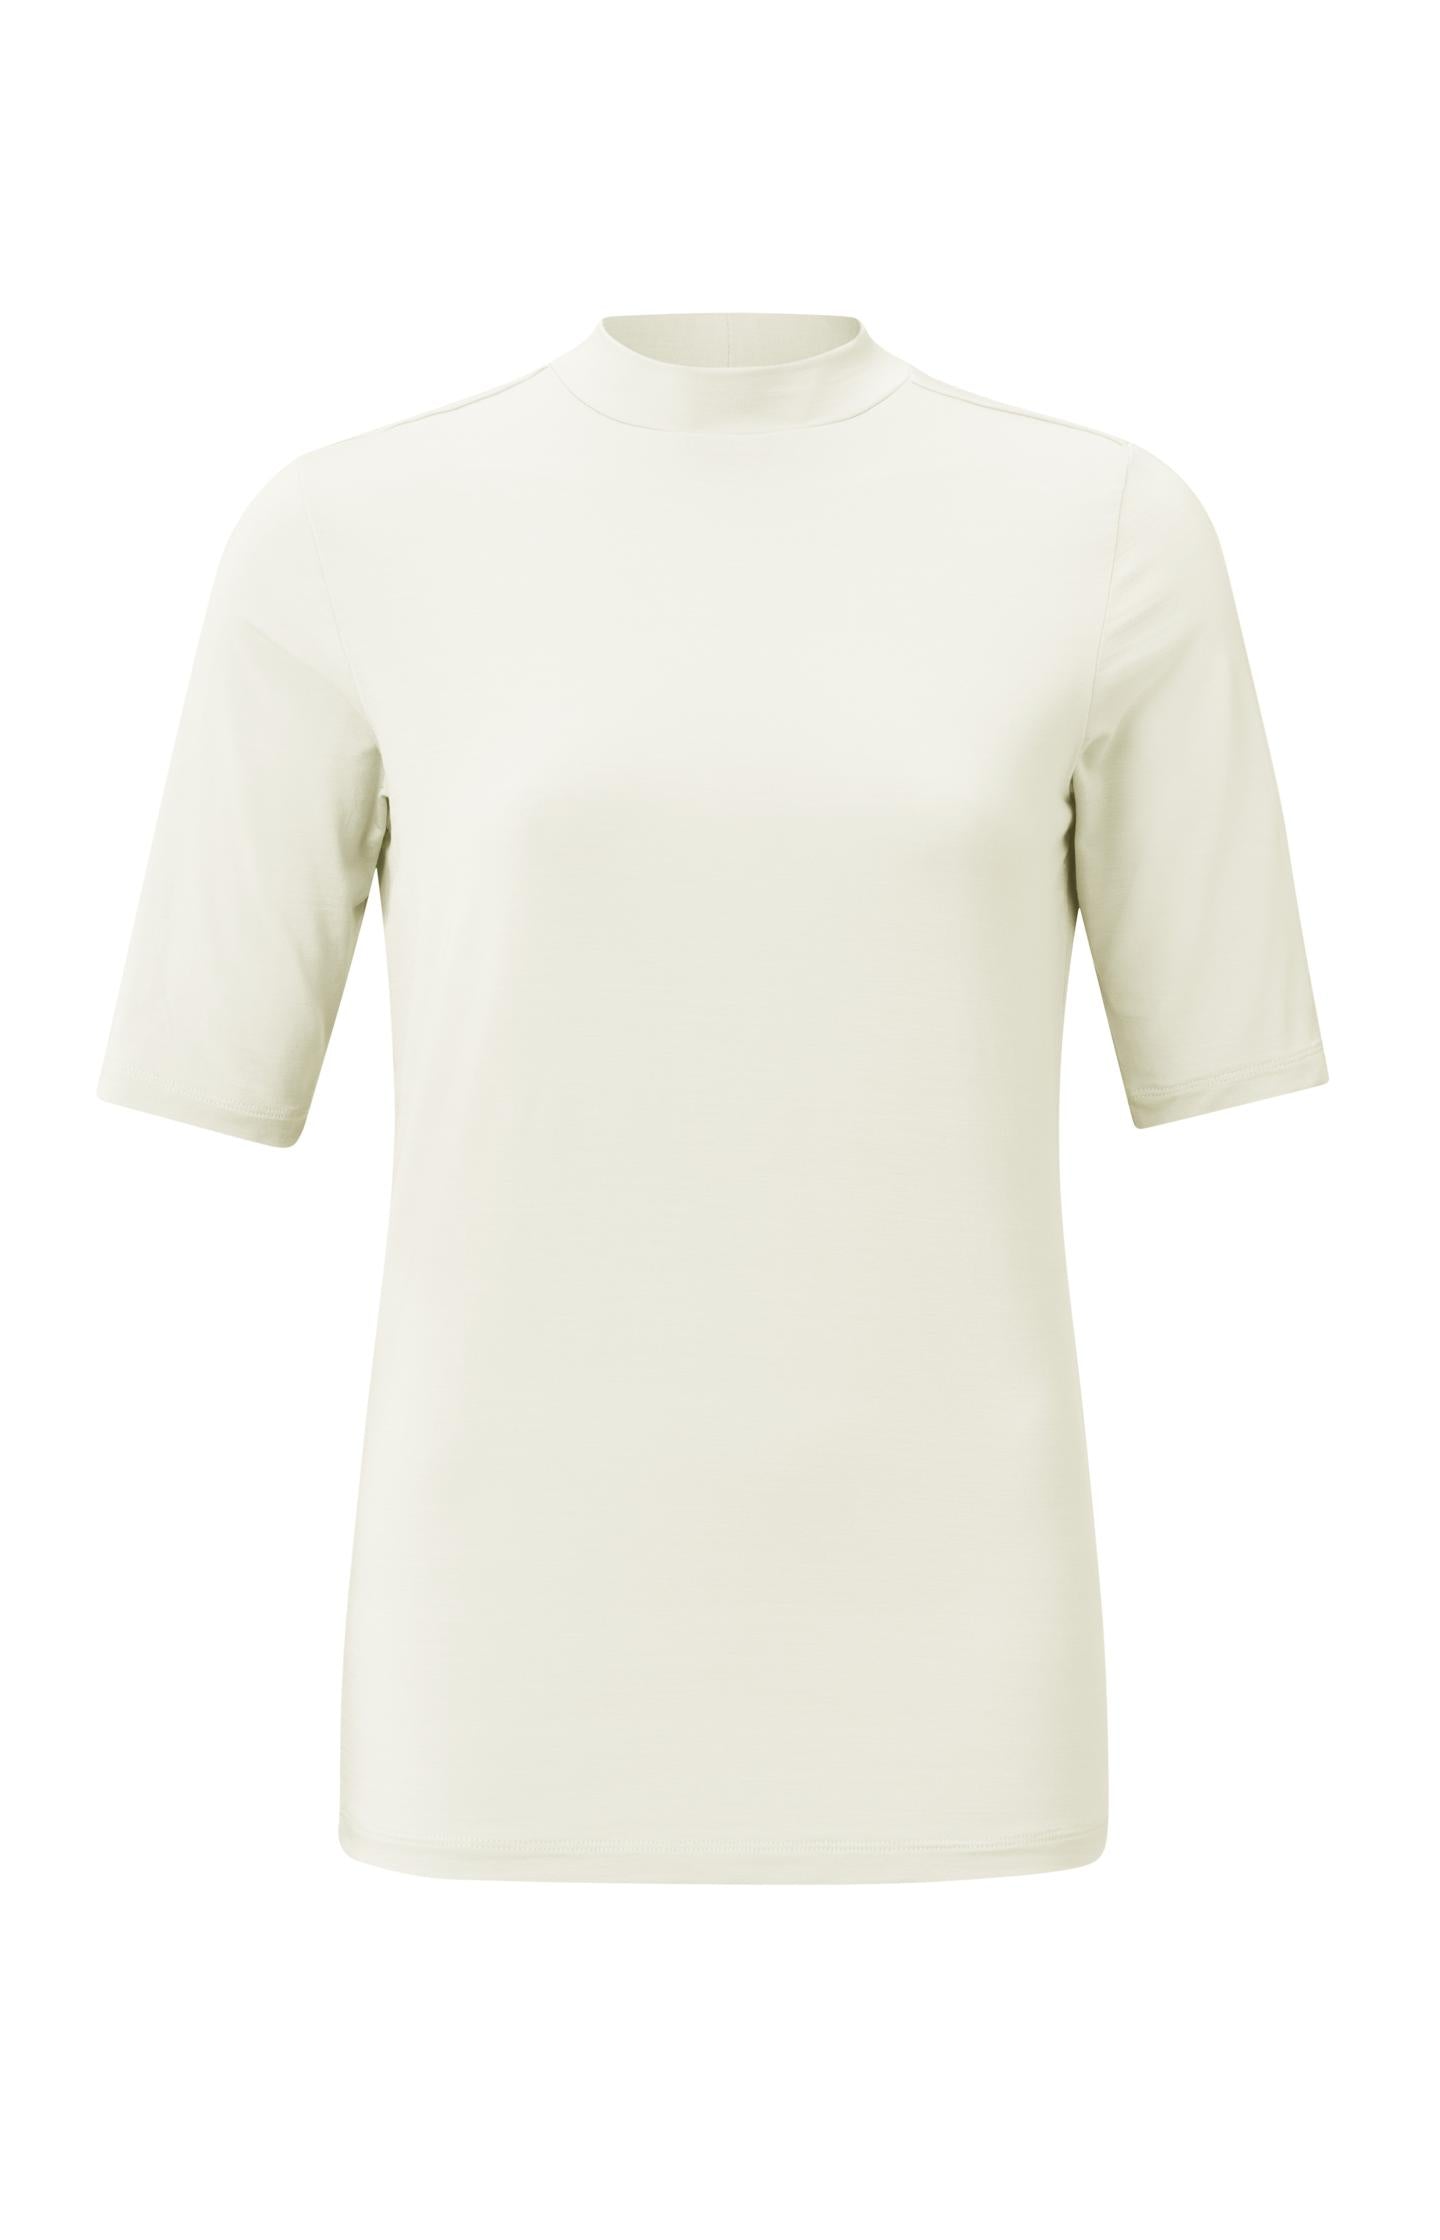 Soft T-shirt with turtleneck and short sleeve in regular fit - Type: product